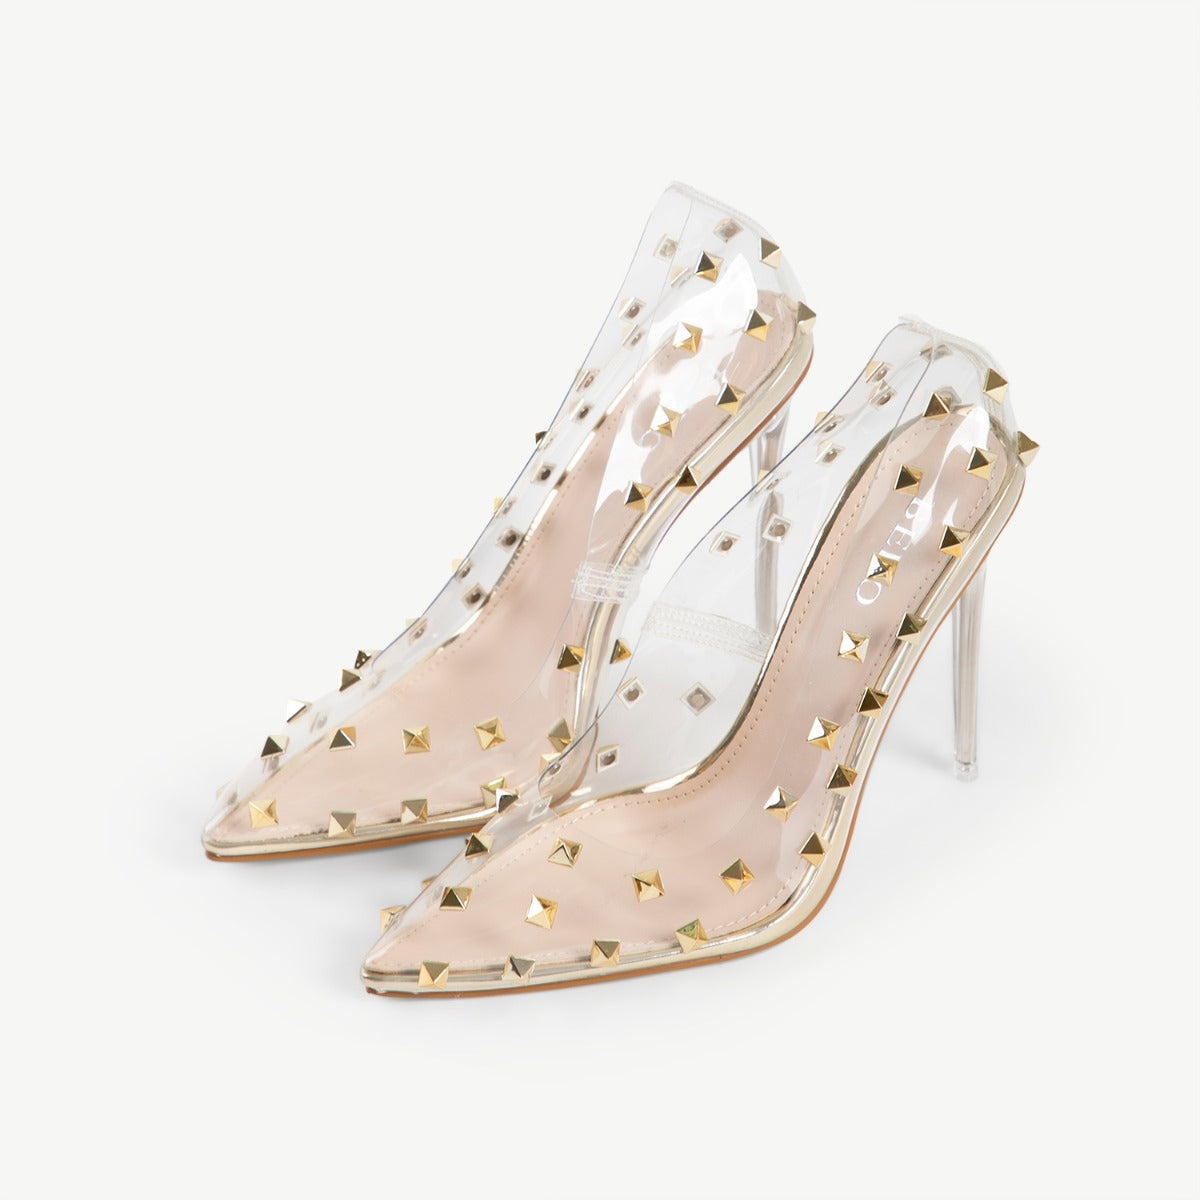 BEBO Mayra Perspex Court Shoe in Gold